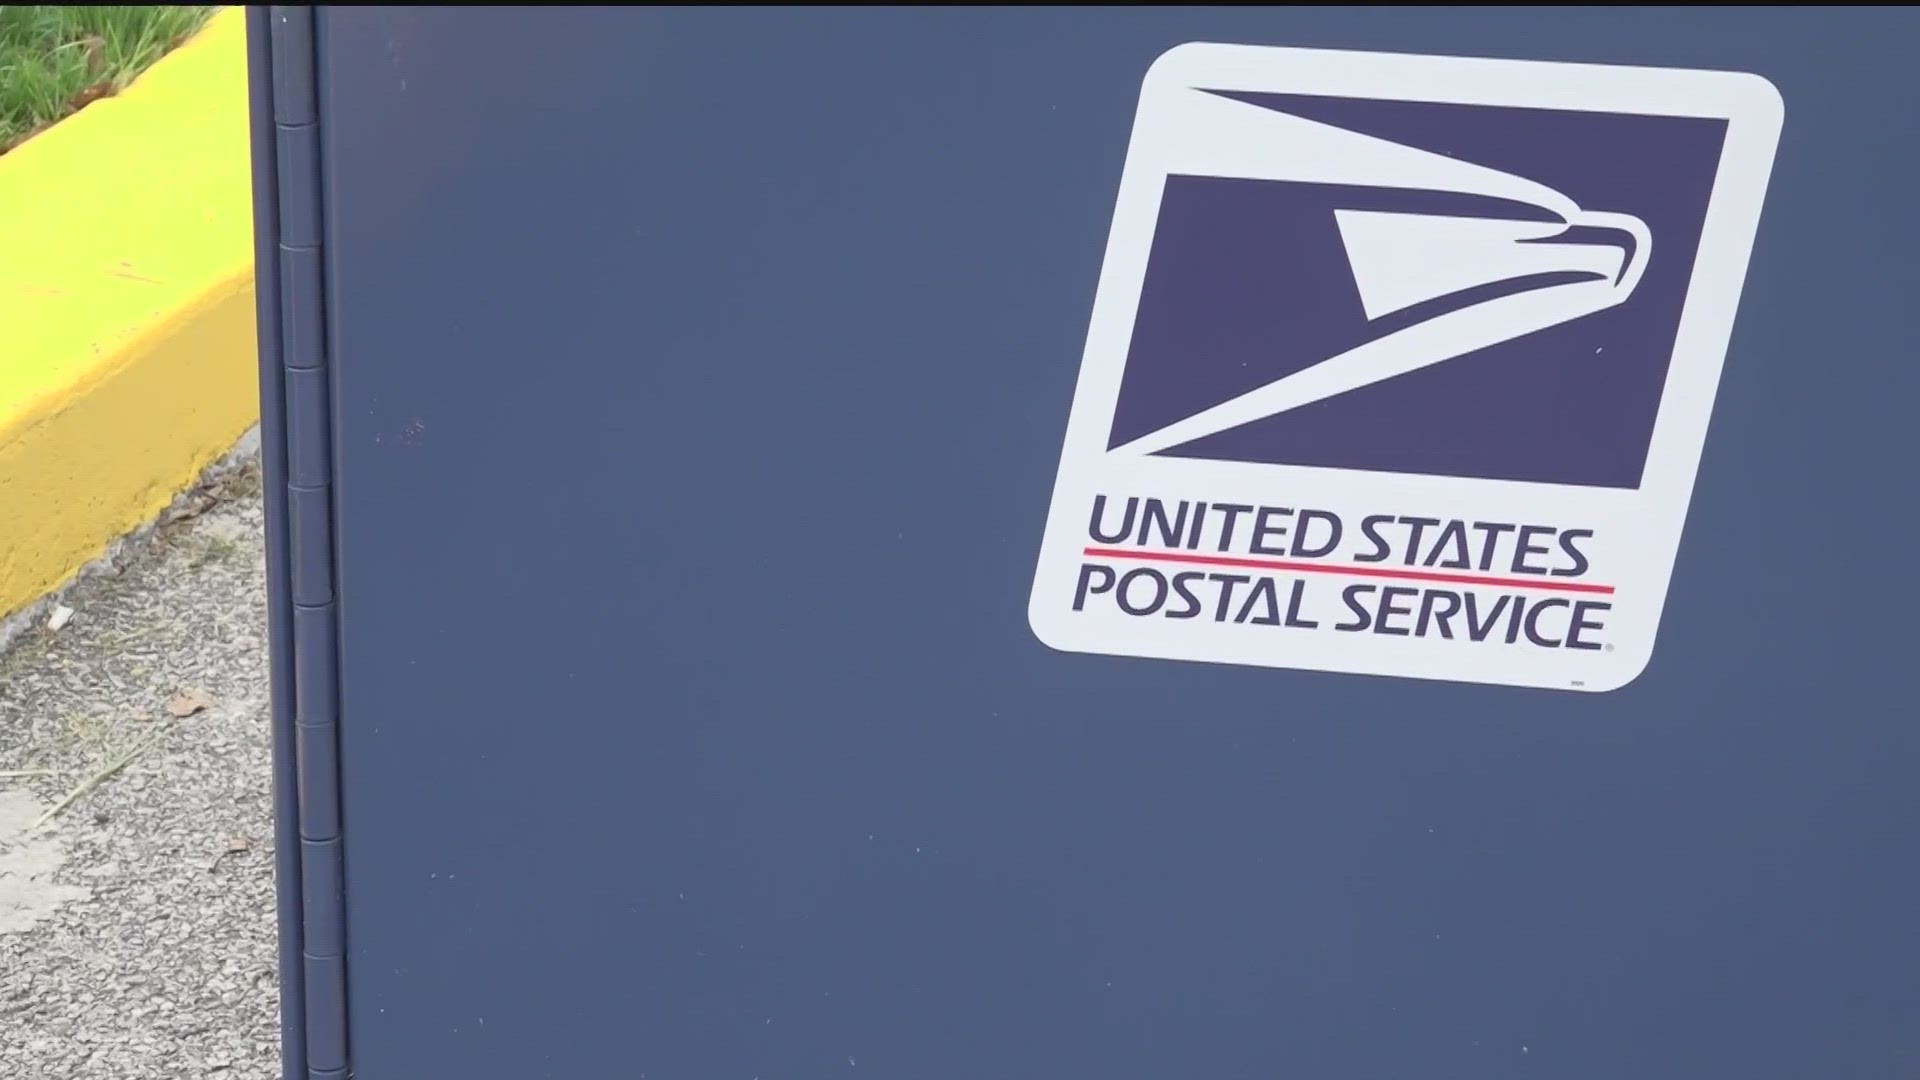 Hundreds have reached out to 11Alive non-stop about their missing mail with items ranging from important tax documents to prescriptions they depend on.